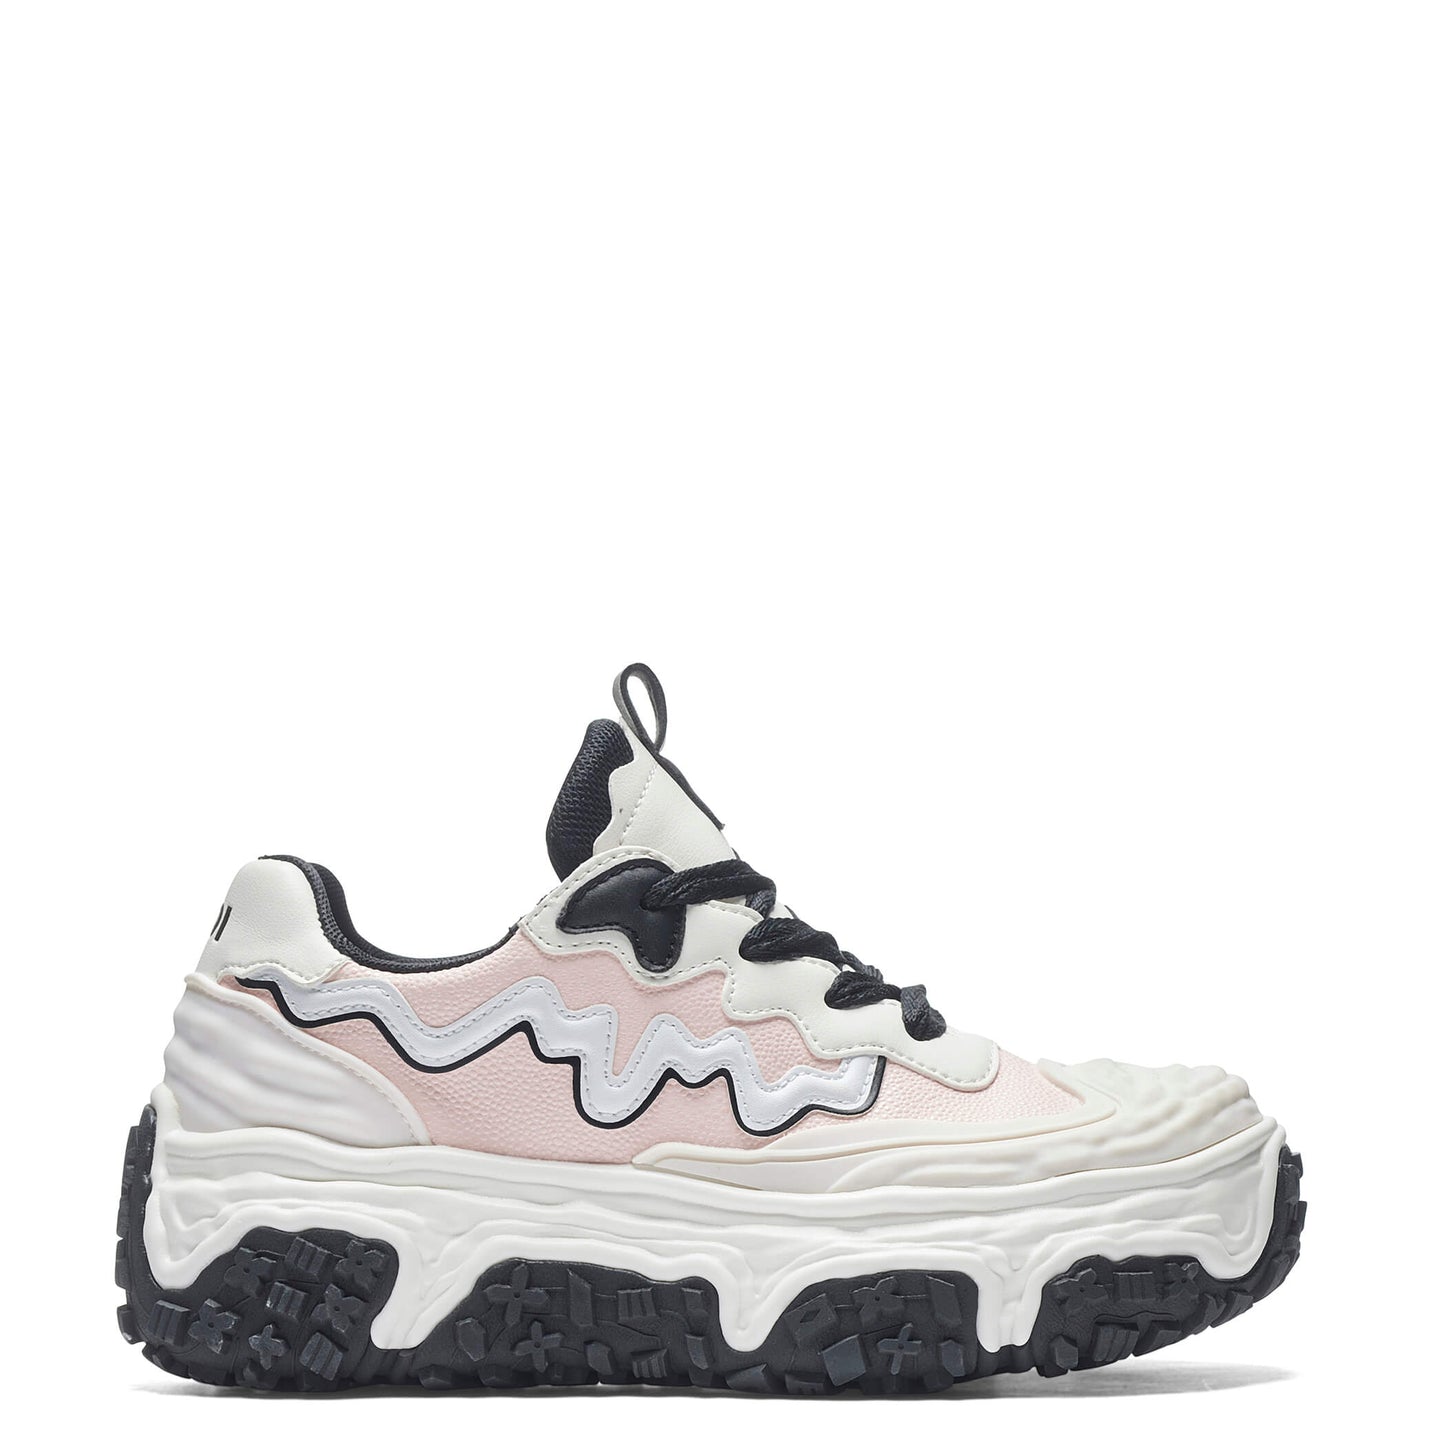 Layer Cake Chunky Trainers - White - KOI Footwear - Front View